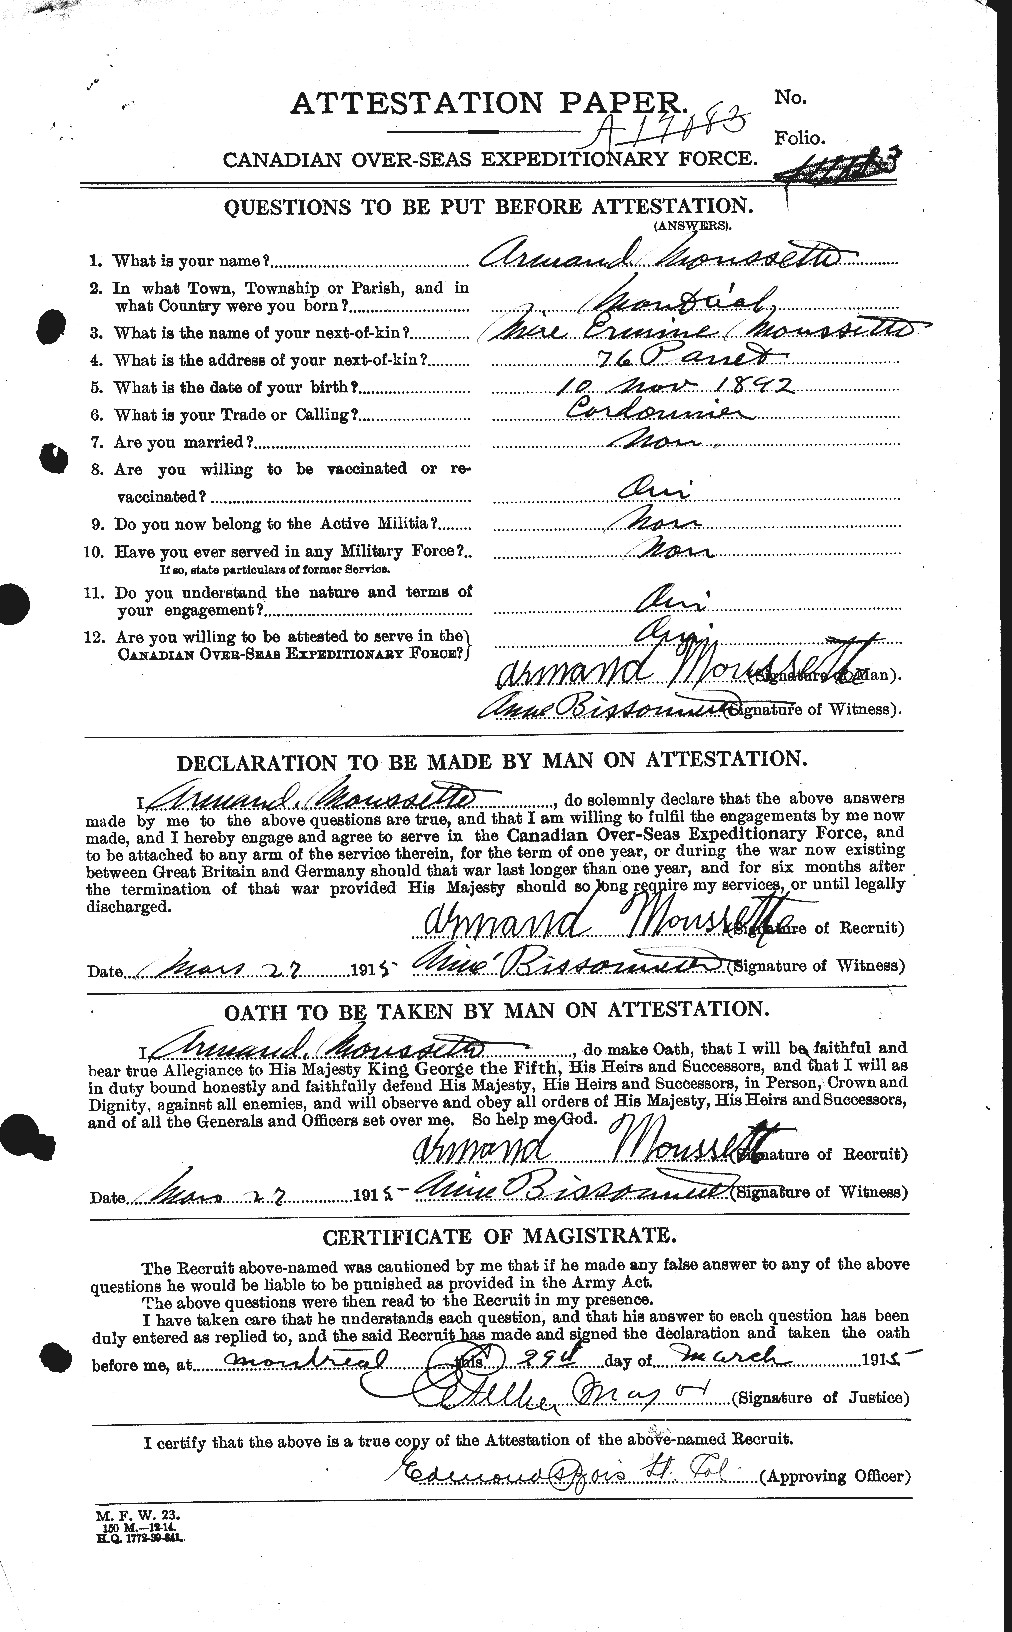 Personnel Records of the First World War - CEF 510385a